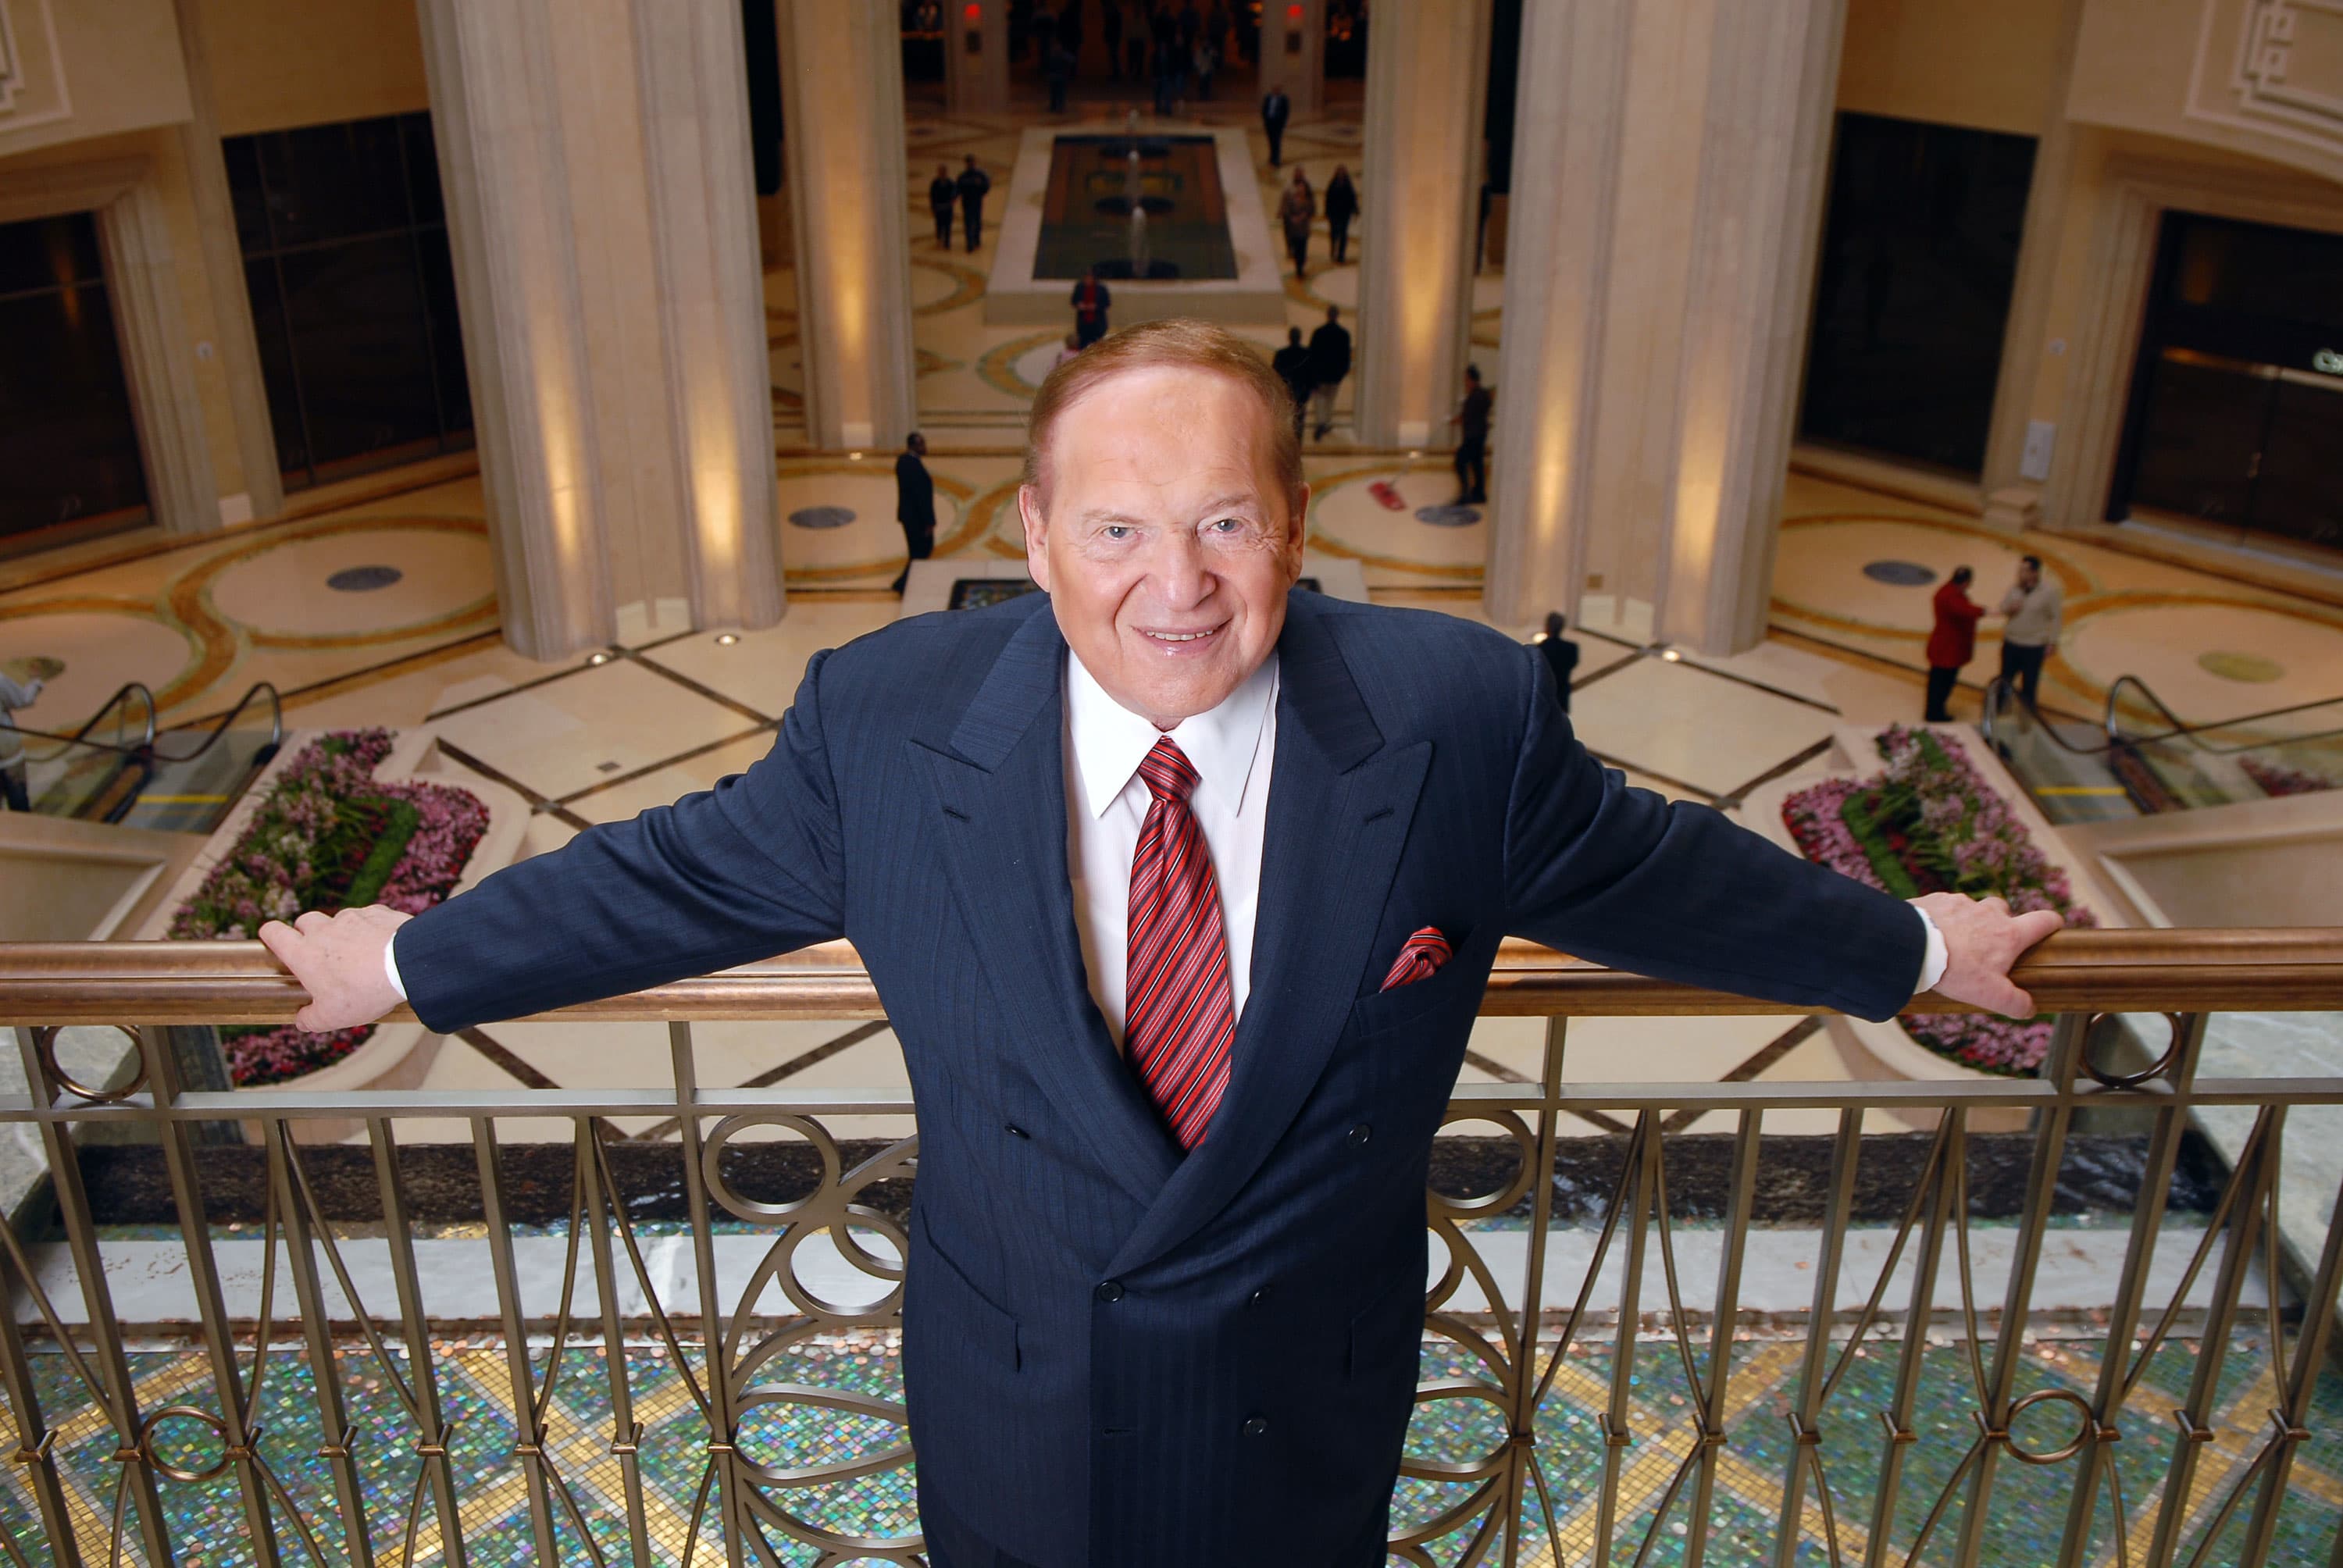 Sheldon Adelson, casino mogul and Republican Party mega-donor, died at 87